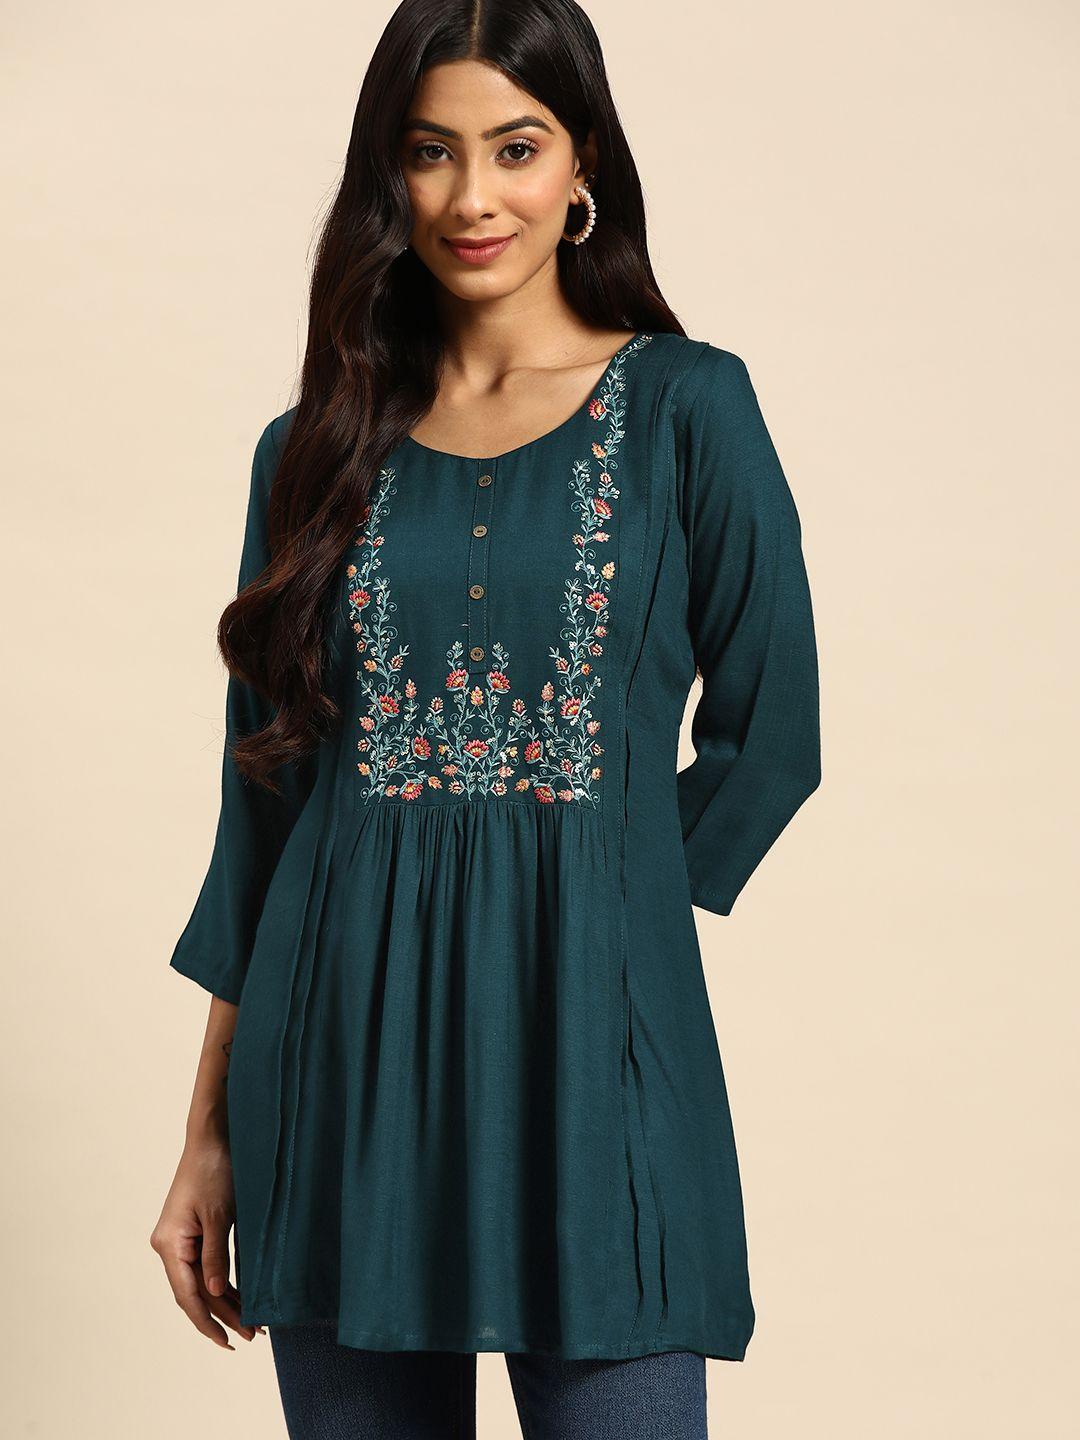 all-about-you-teal-floral-embroidered-longline-top